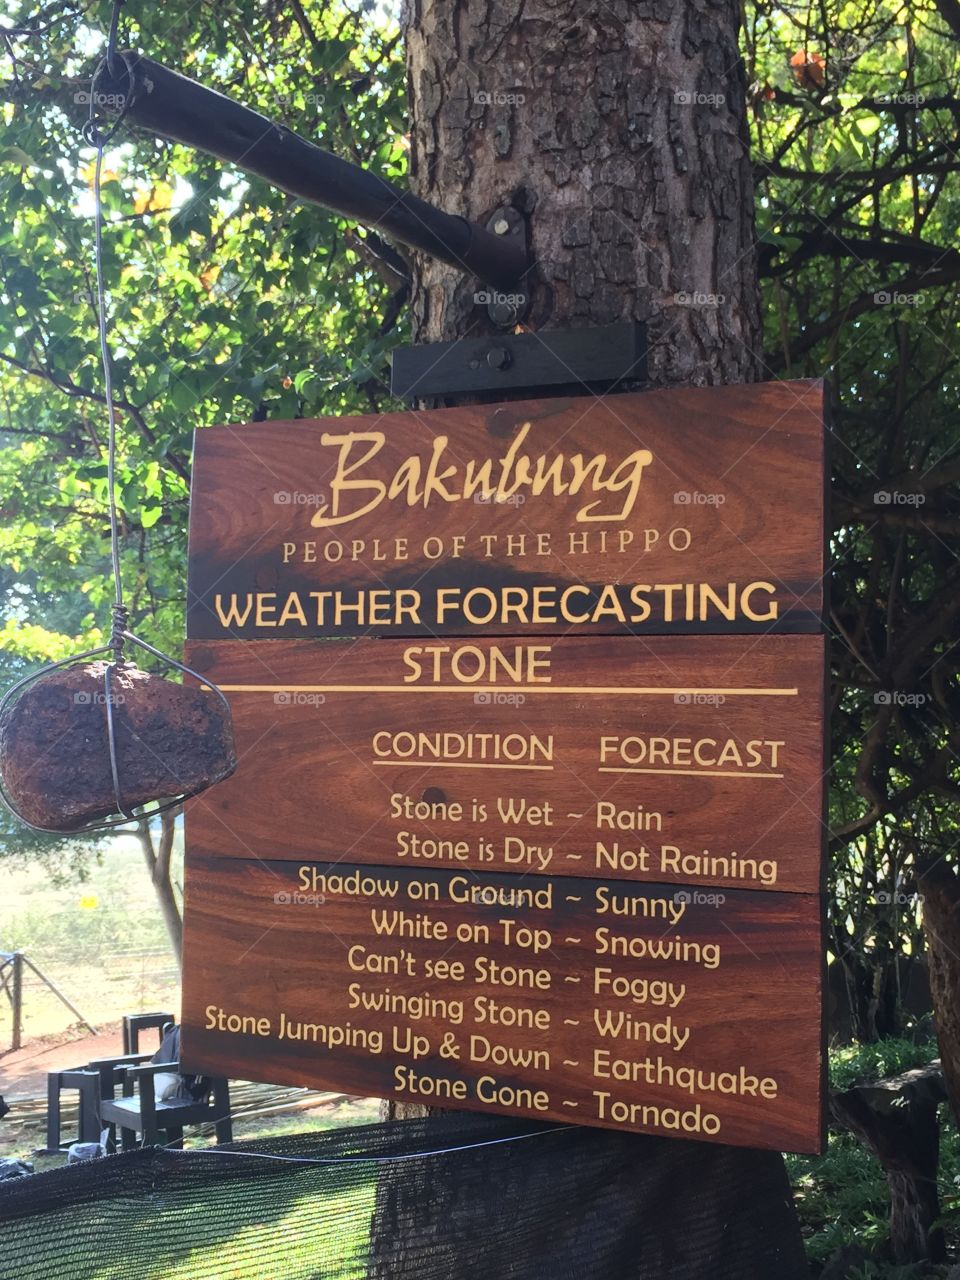 Very accurate weather forecast !